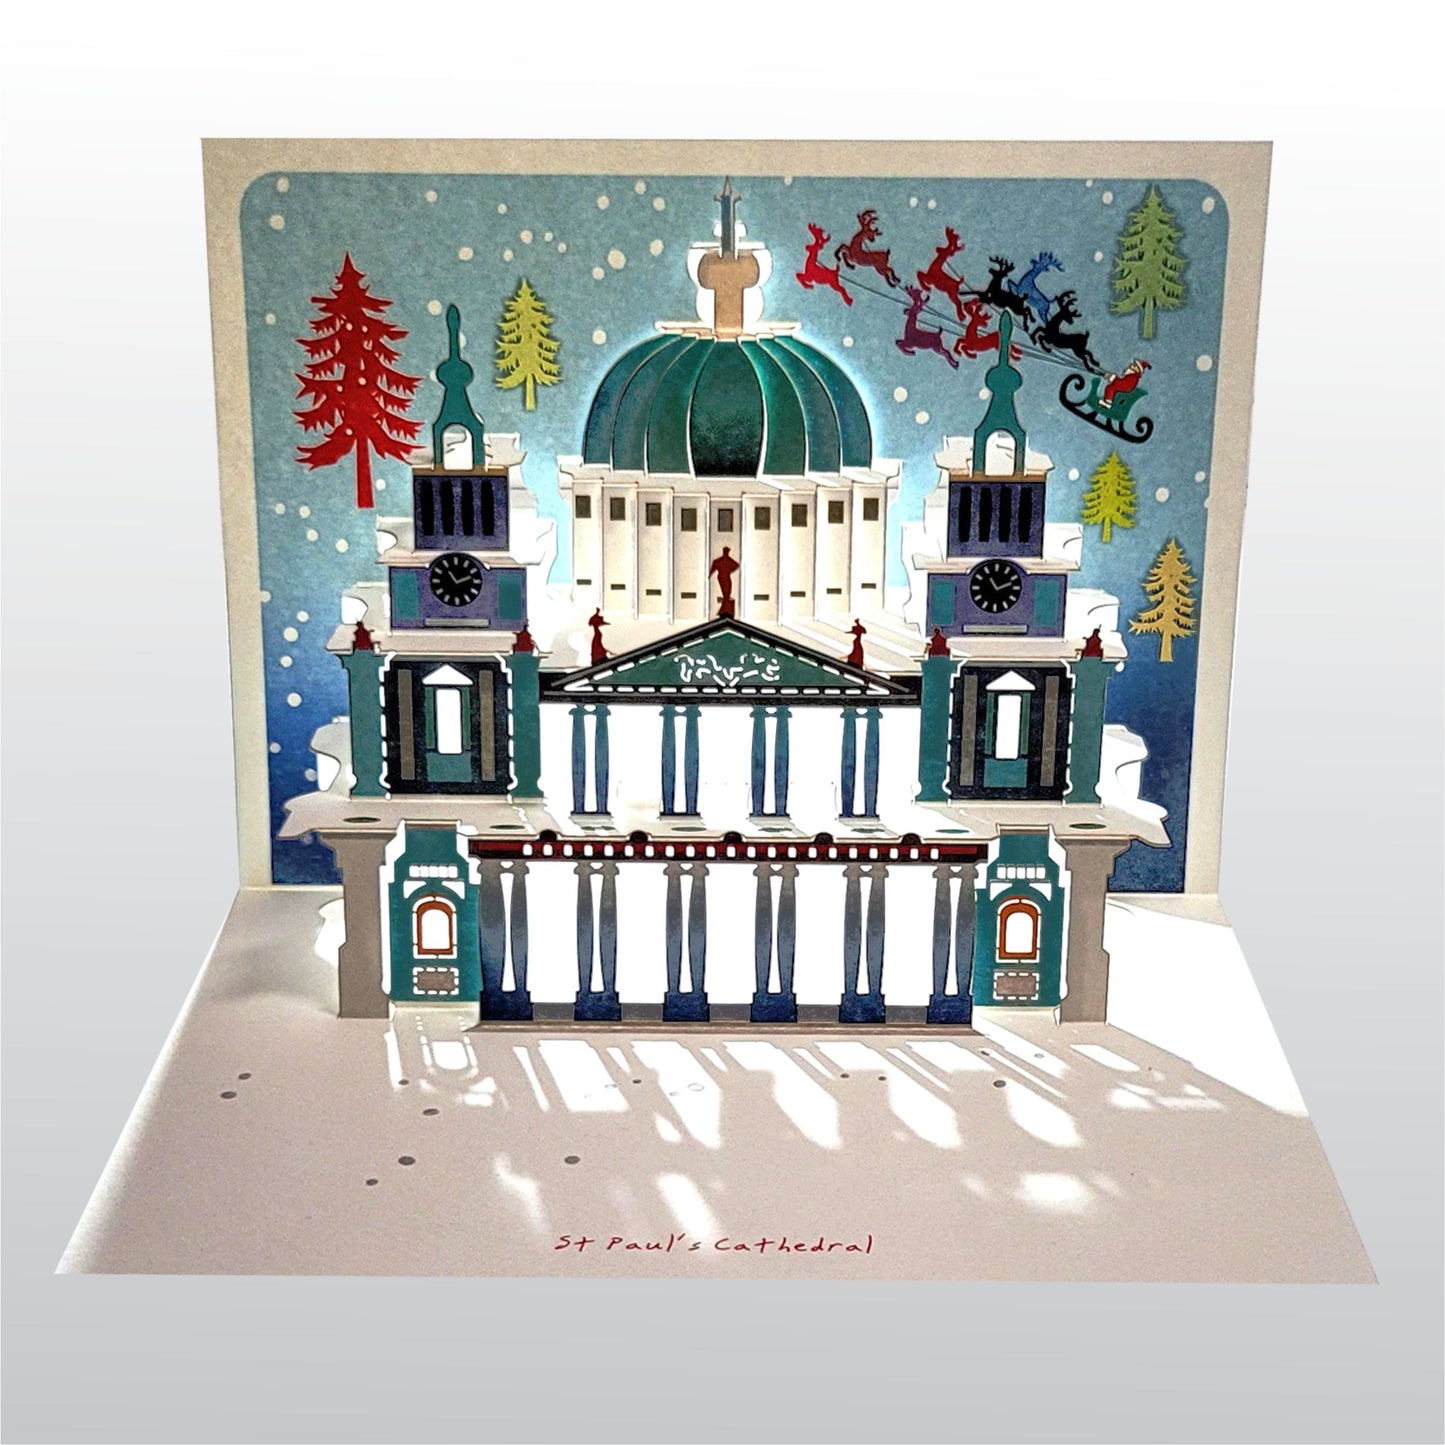 Pop Up ''St Paul's Cathedral'' Blue - Christmas Card - 3d Card, Pop Up Card - #POP-034-BLUE